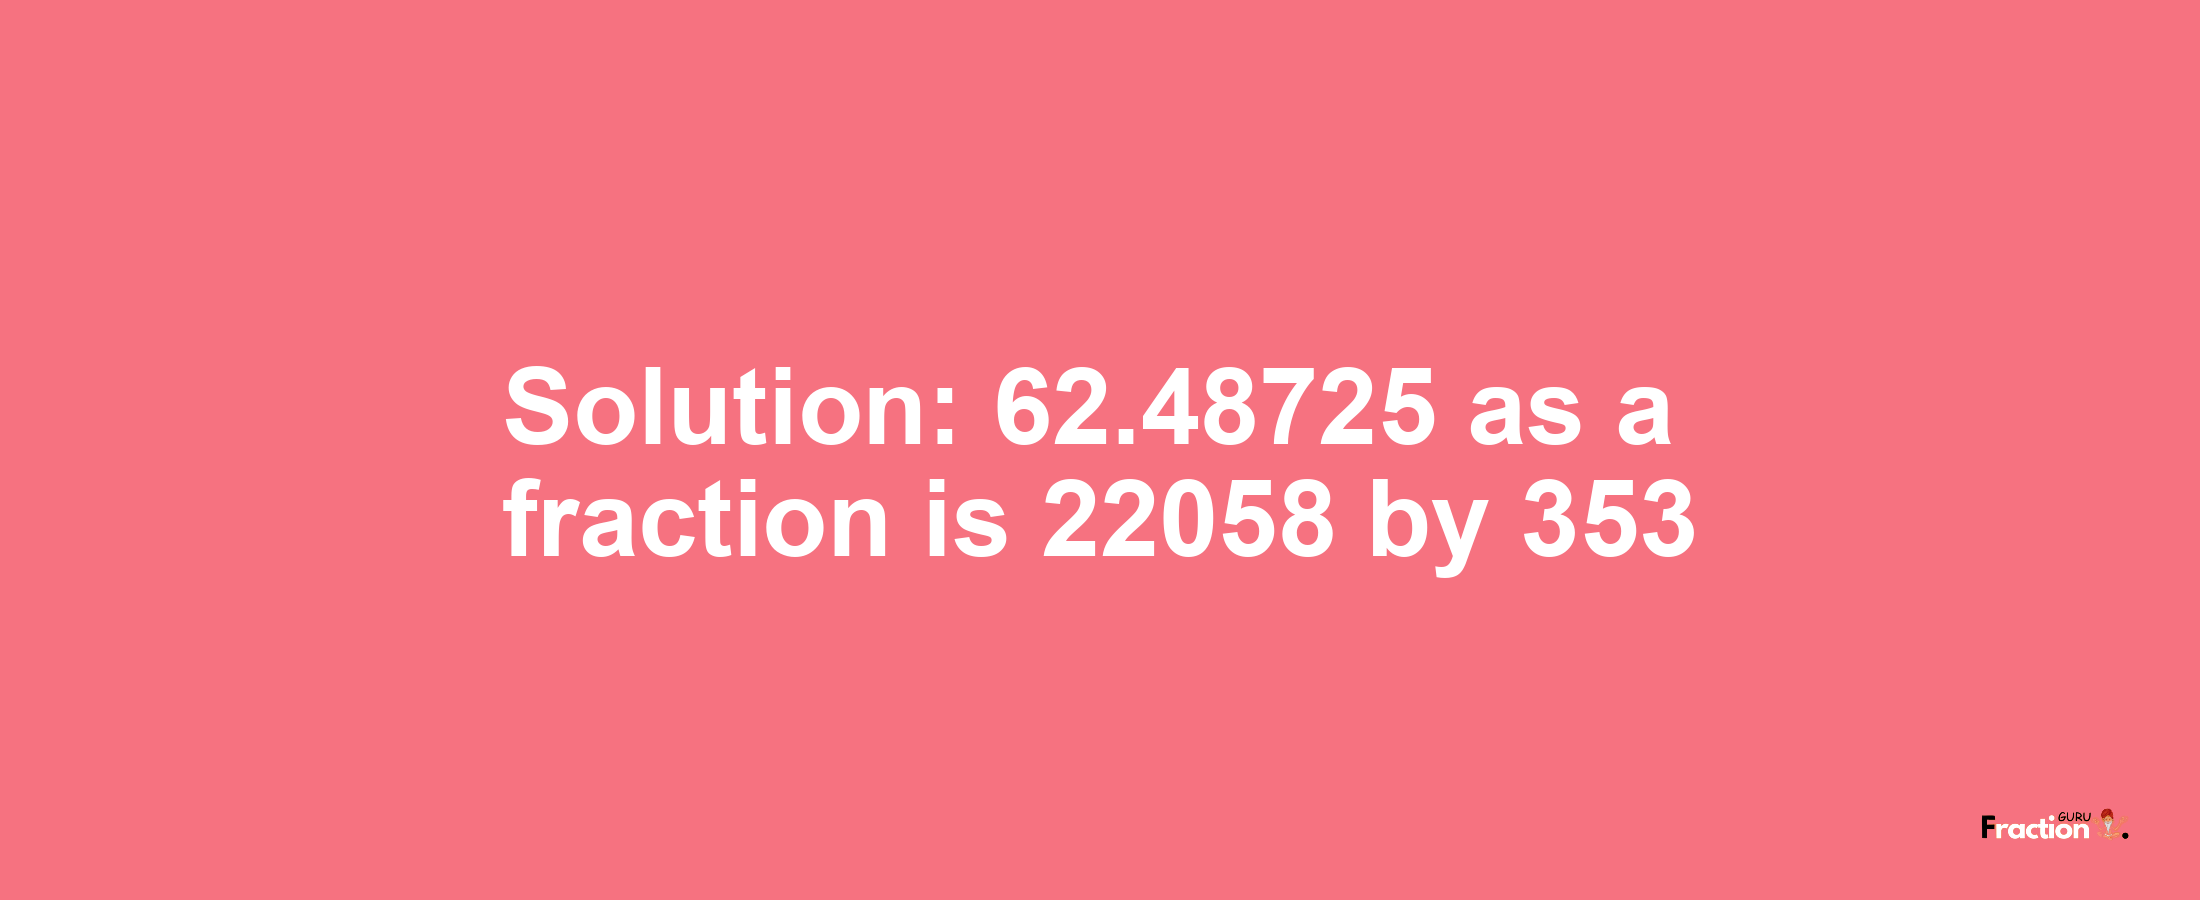 Solution:62.48725 as a fraction is 22058/353